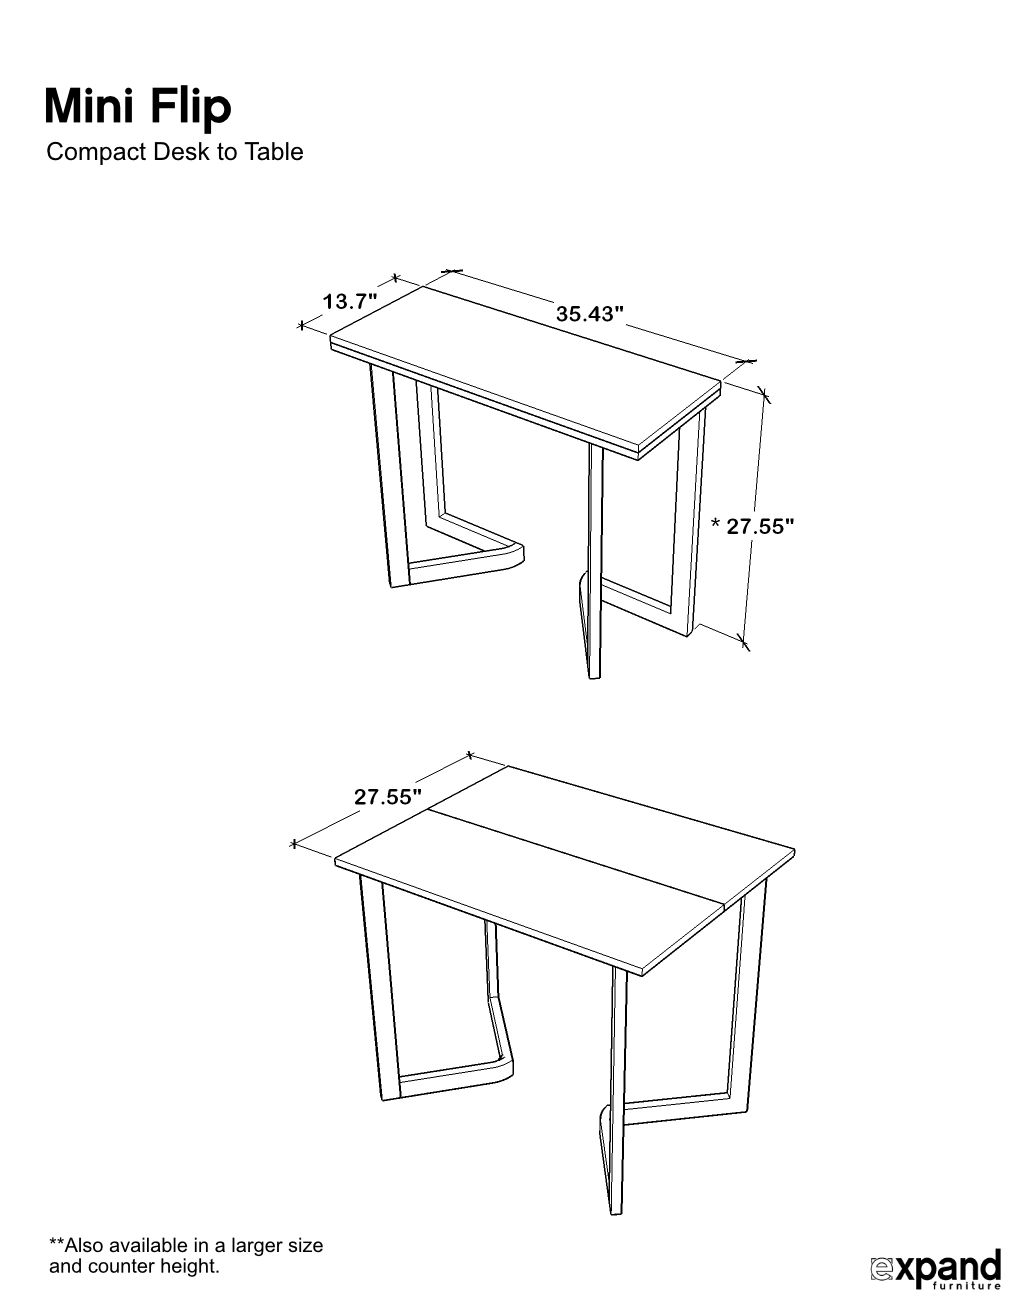 Mini Flip Compact Desk To Table Expand Furniture